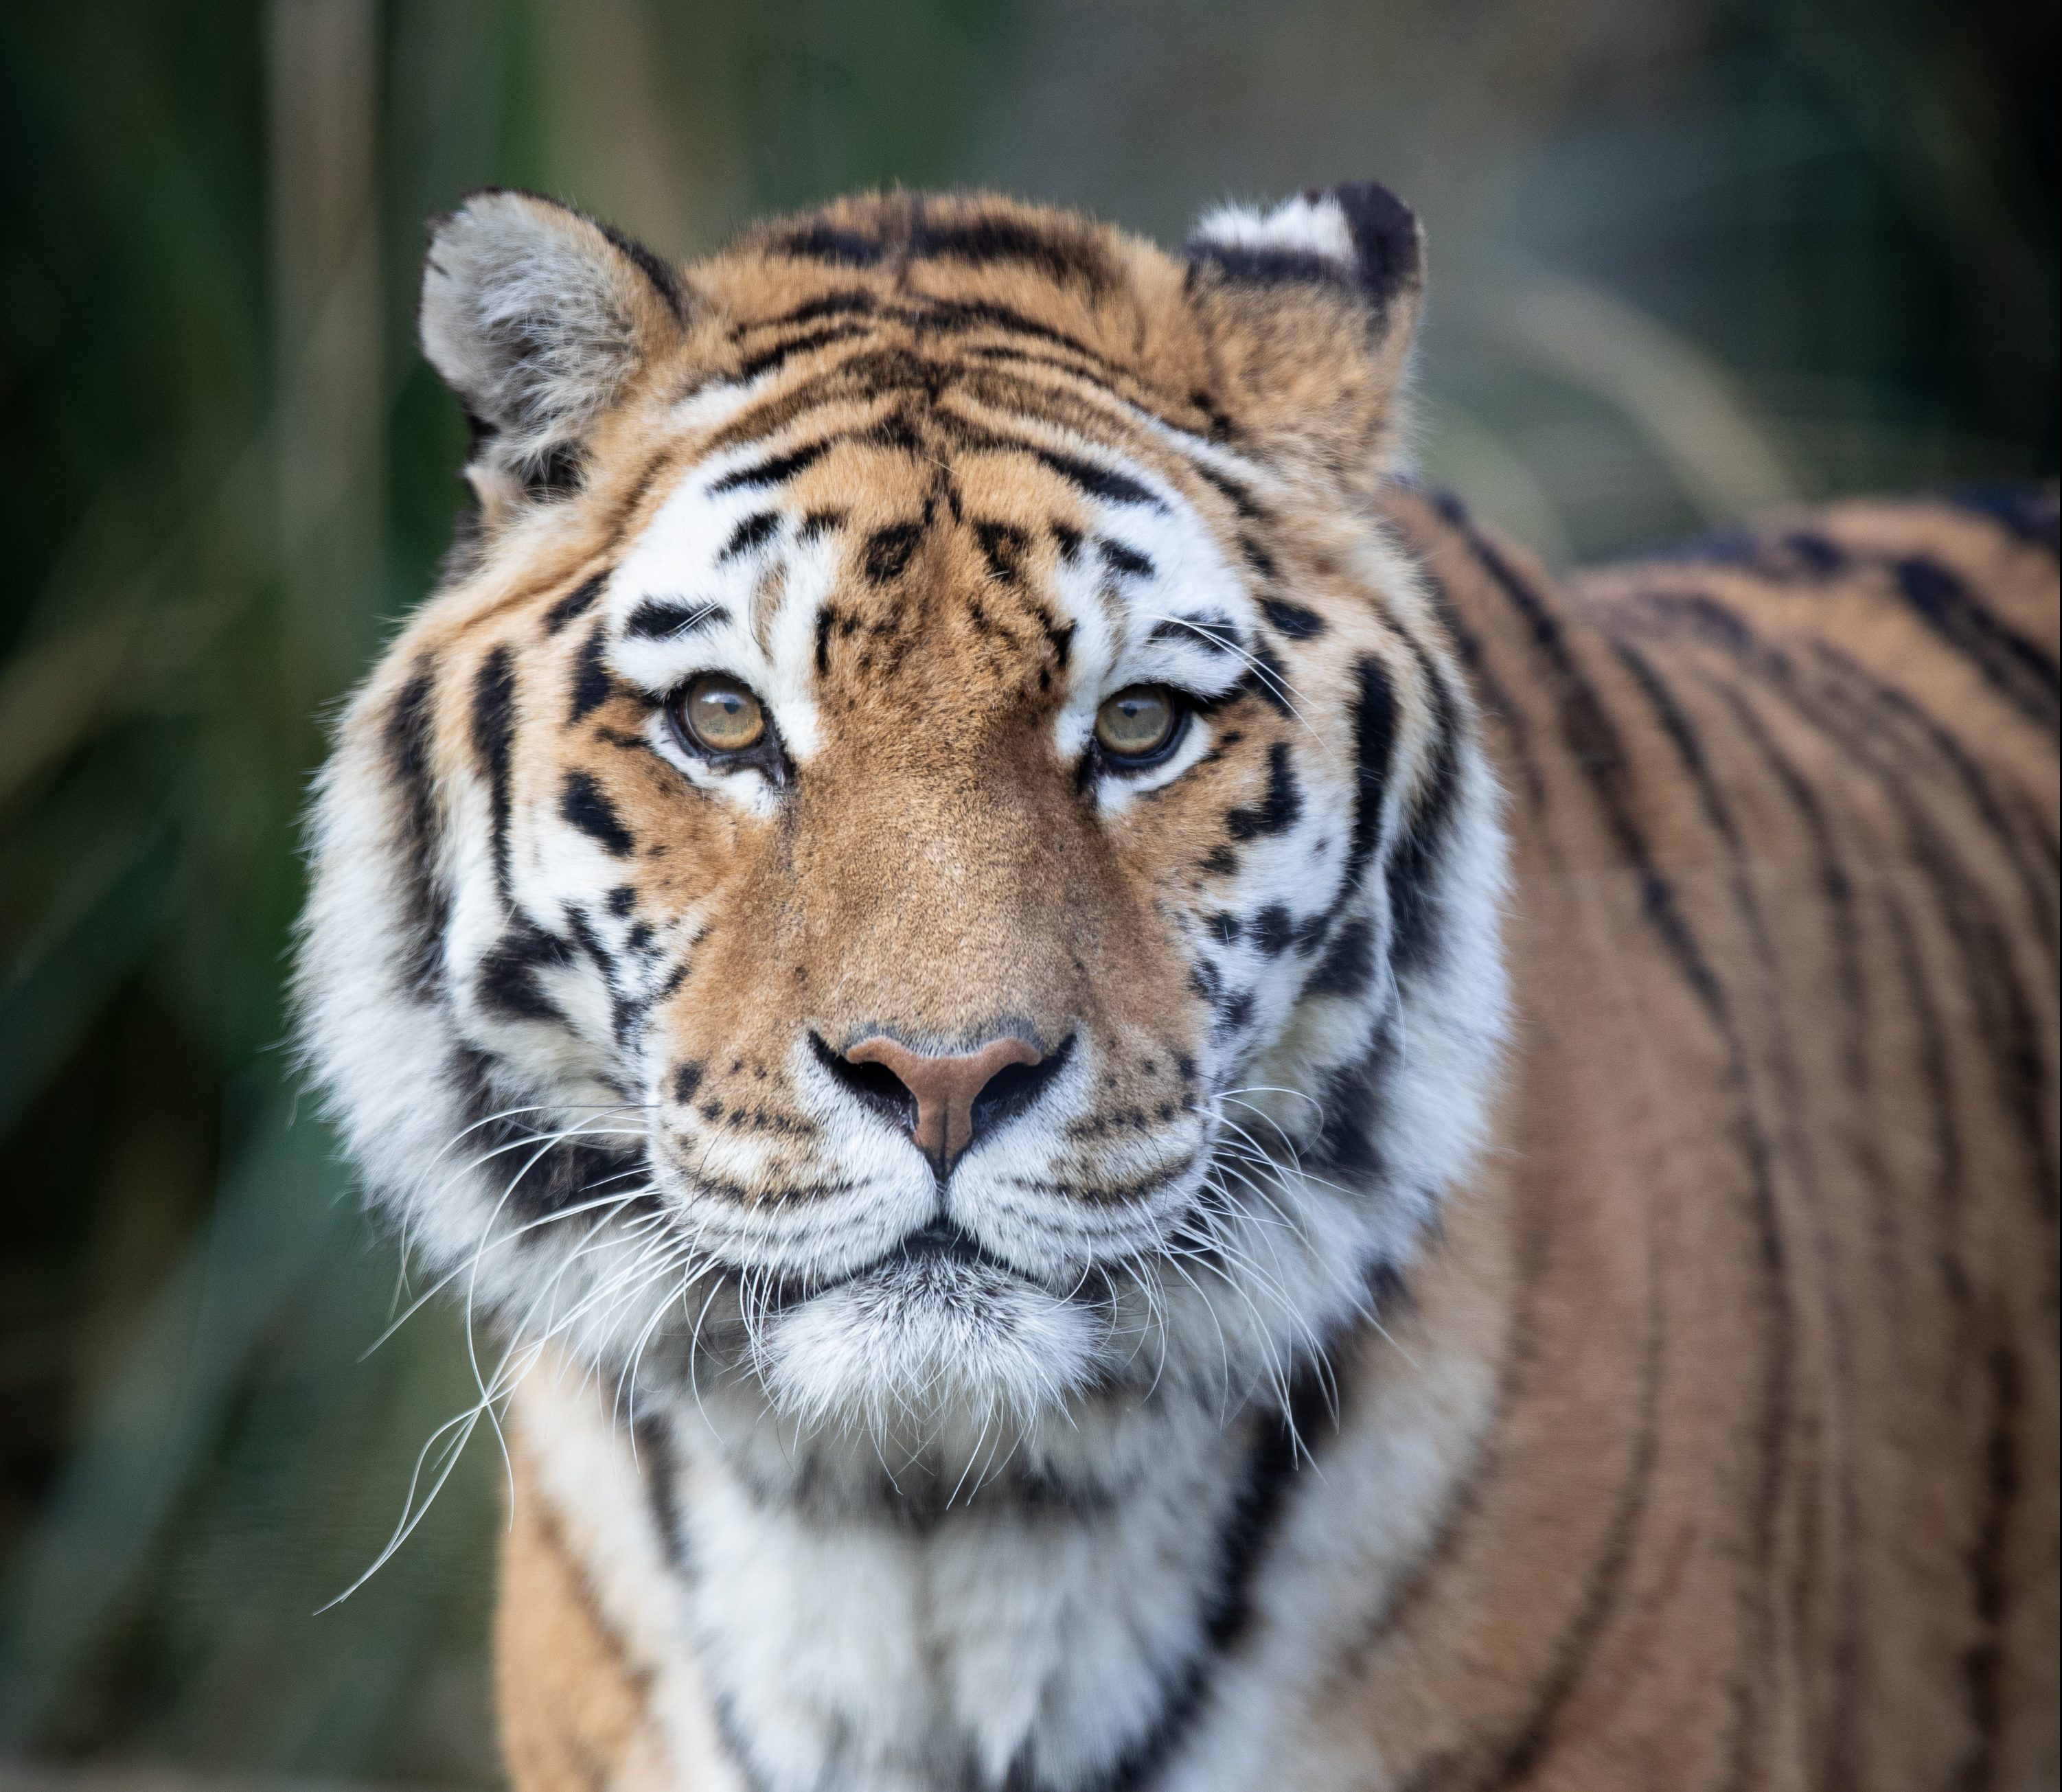 a male Amur tiger looking directly at the camera